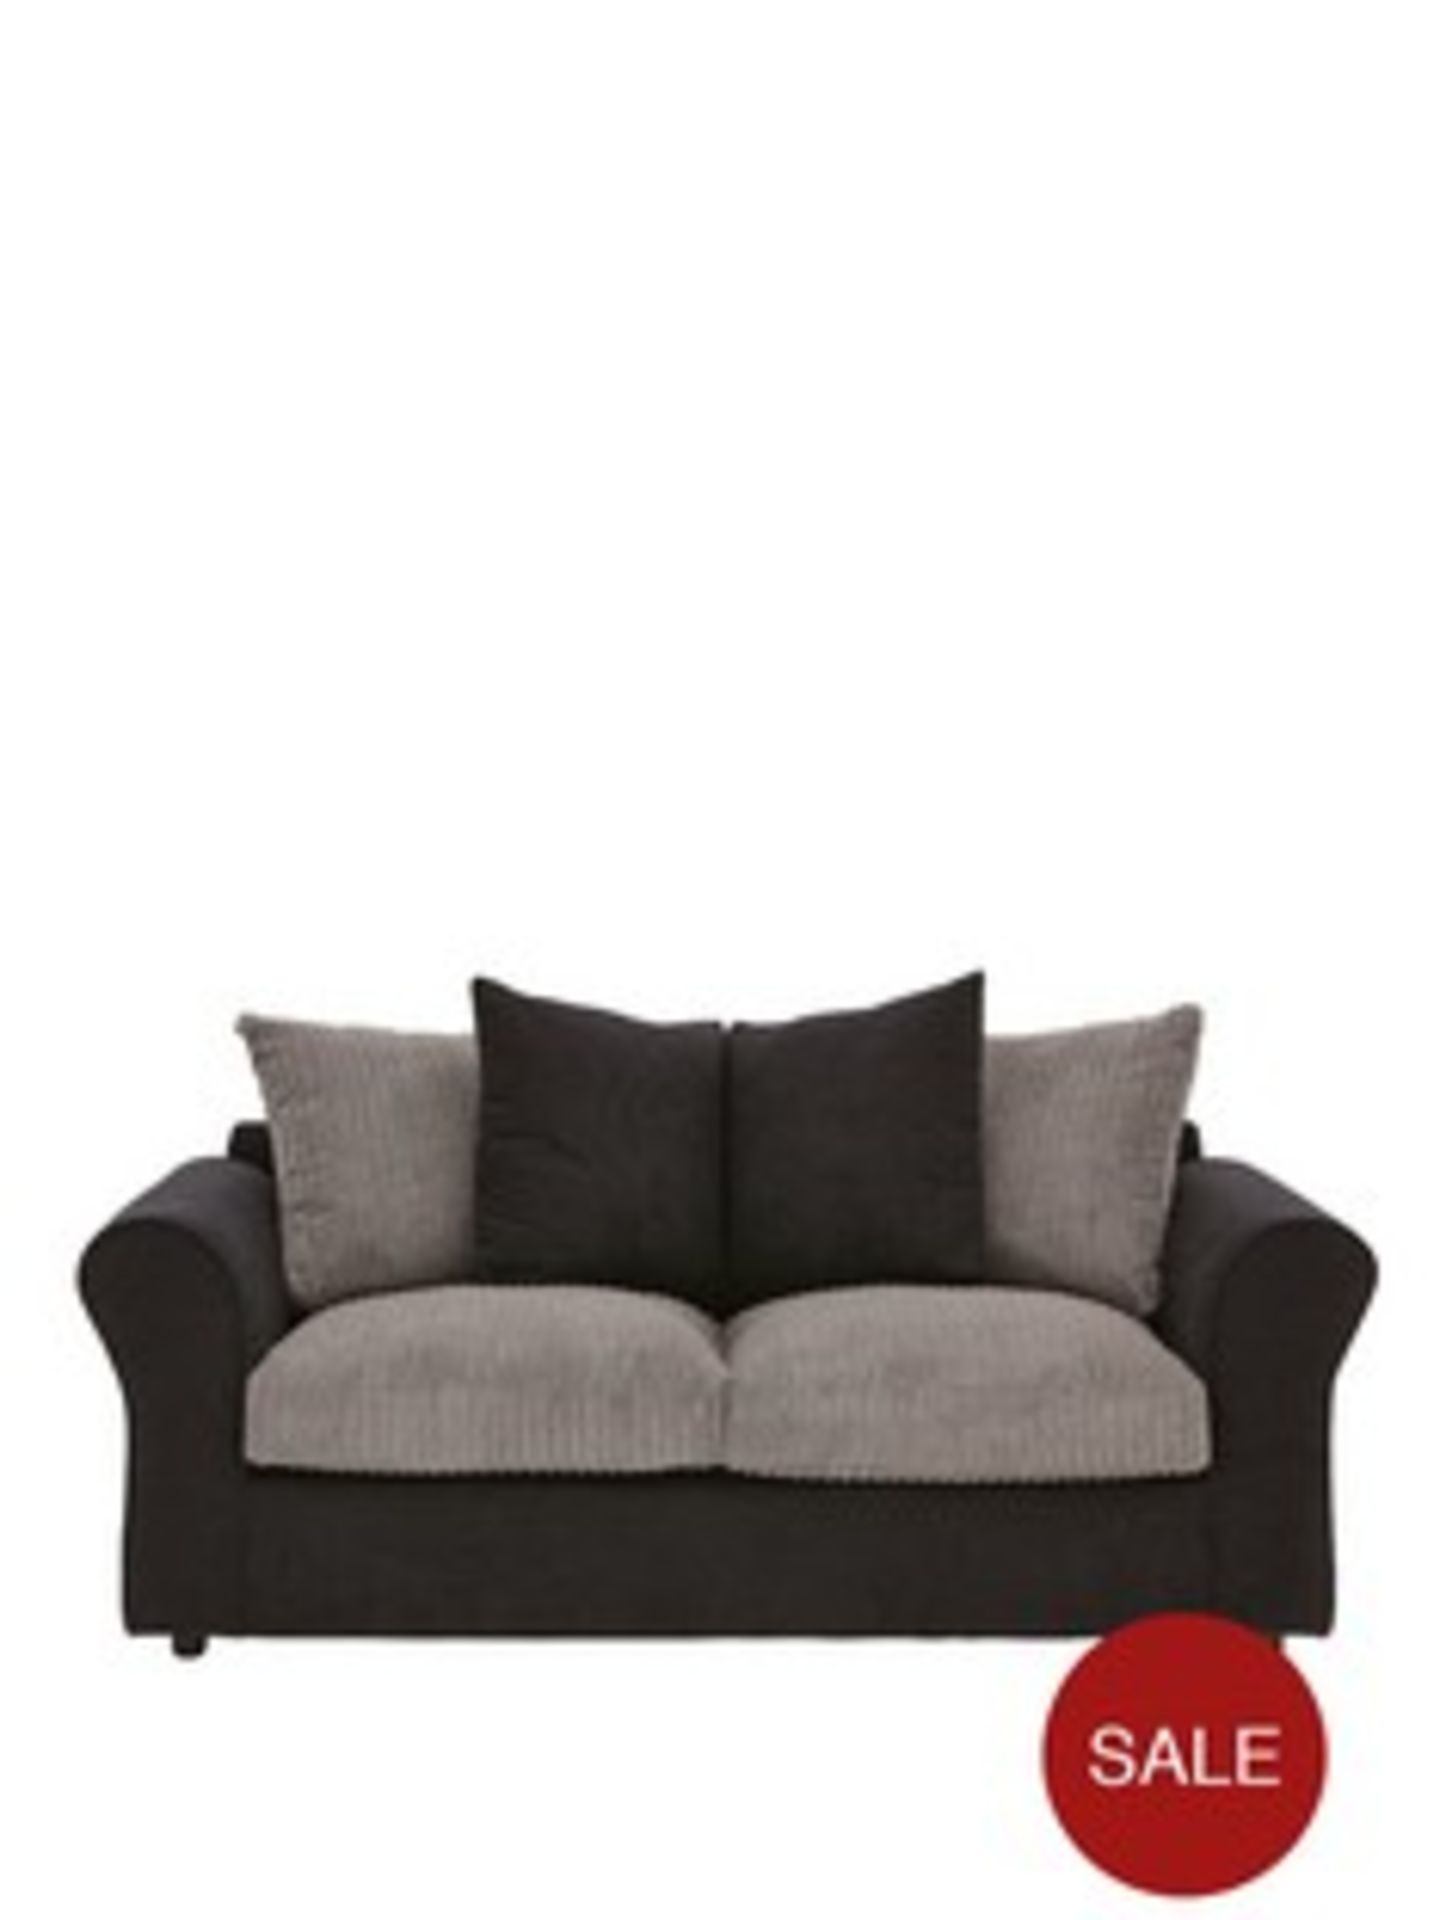 Brand new direct from the manufacturers 3 seater and 2 seater Rebecca sofas designed with a black